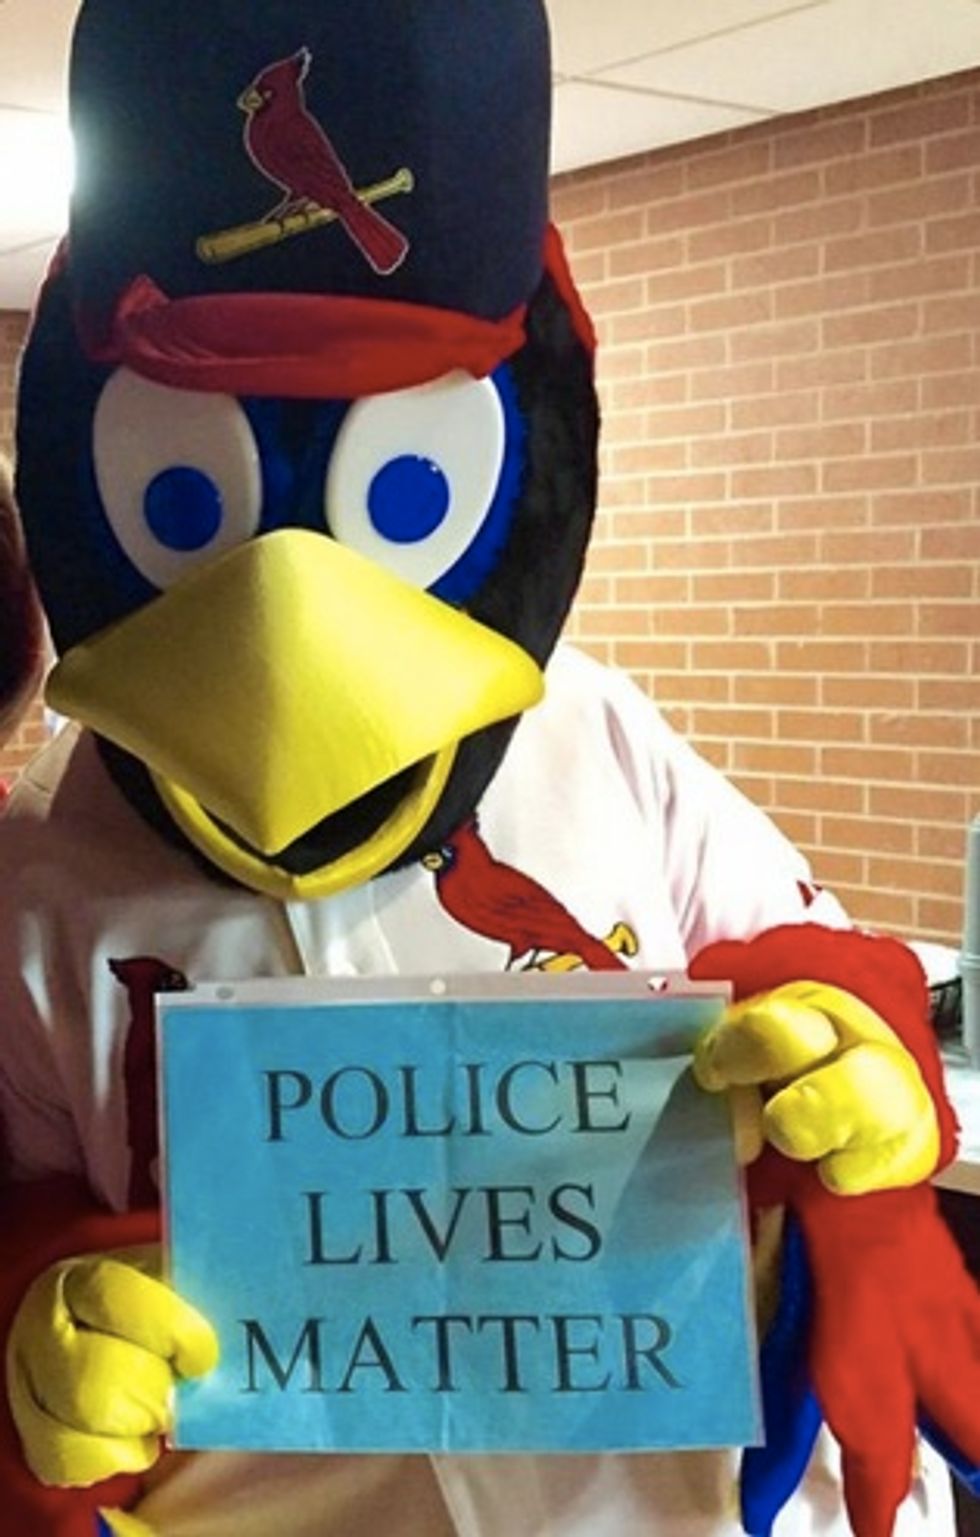 St. Louis Cardinals' Mascot in Photo Holding 'Police Lives Matter' Sign. Want to Guess How That Went Over With the Team?